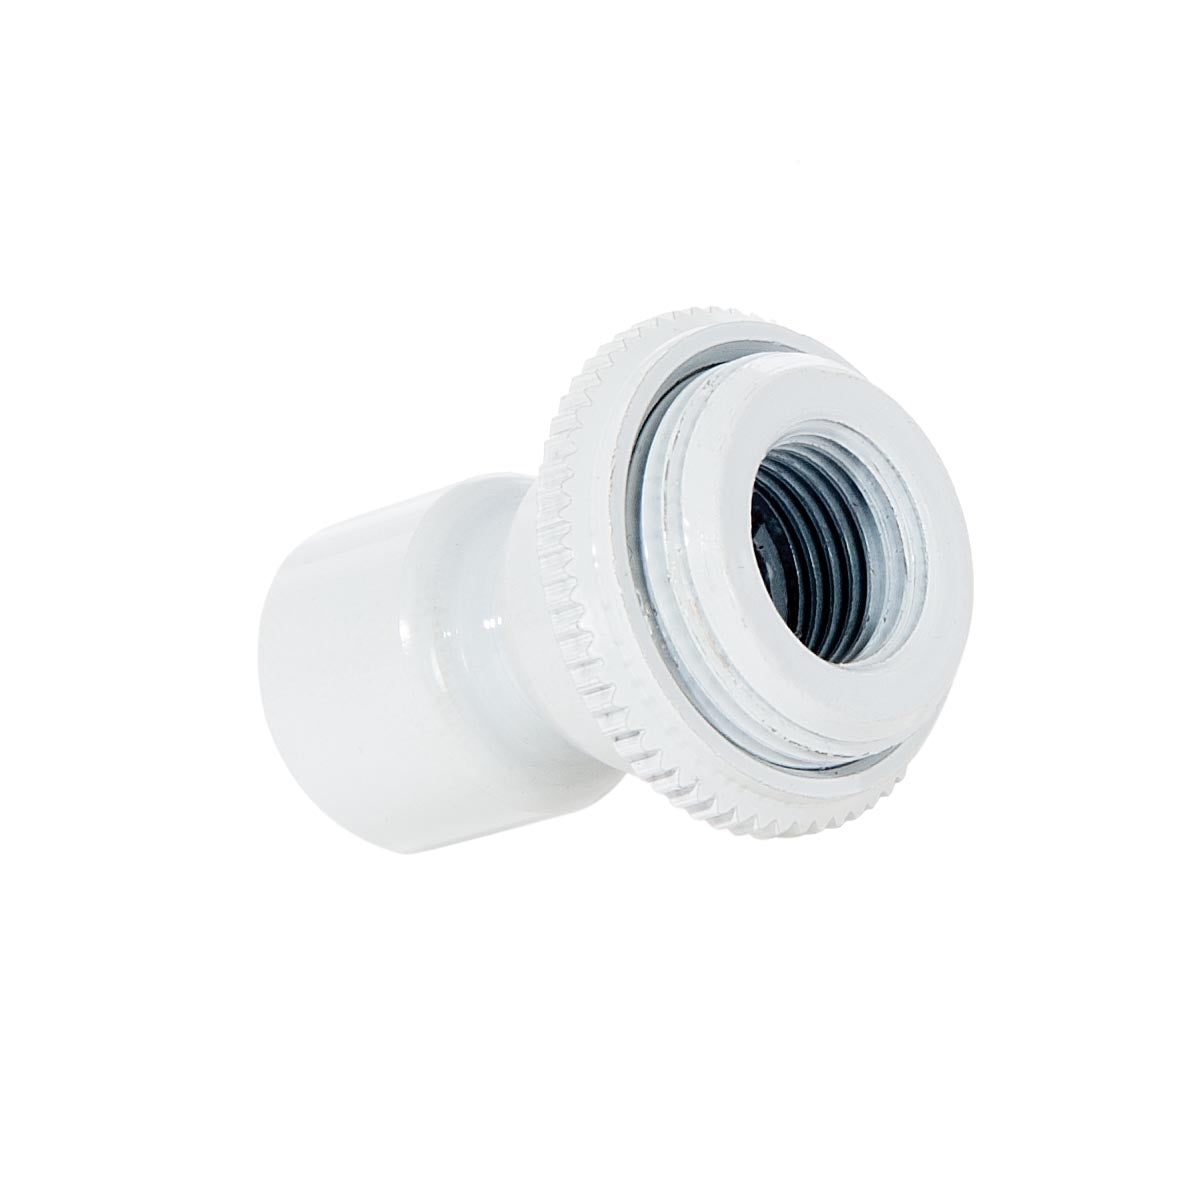 1-1/2 Inch Tall White Enamel Hang Straight Swivel with Screw Collar, 1/4F